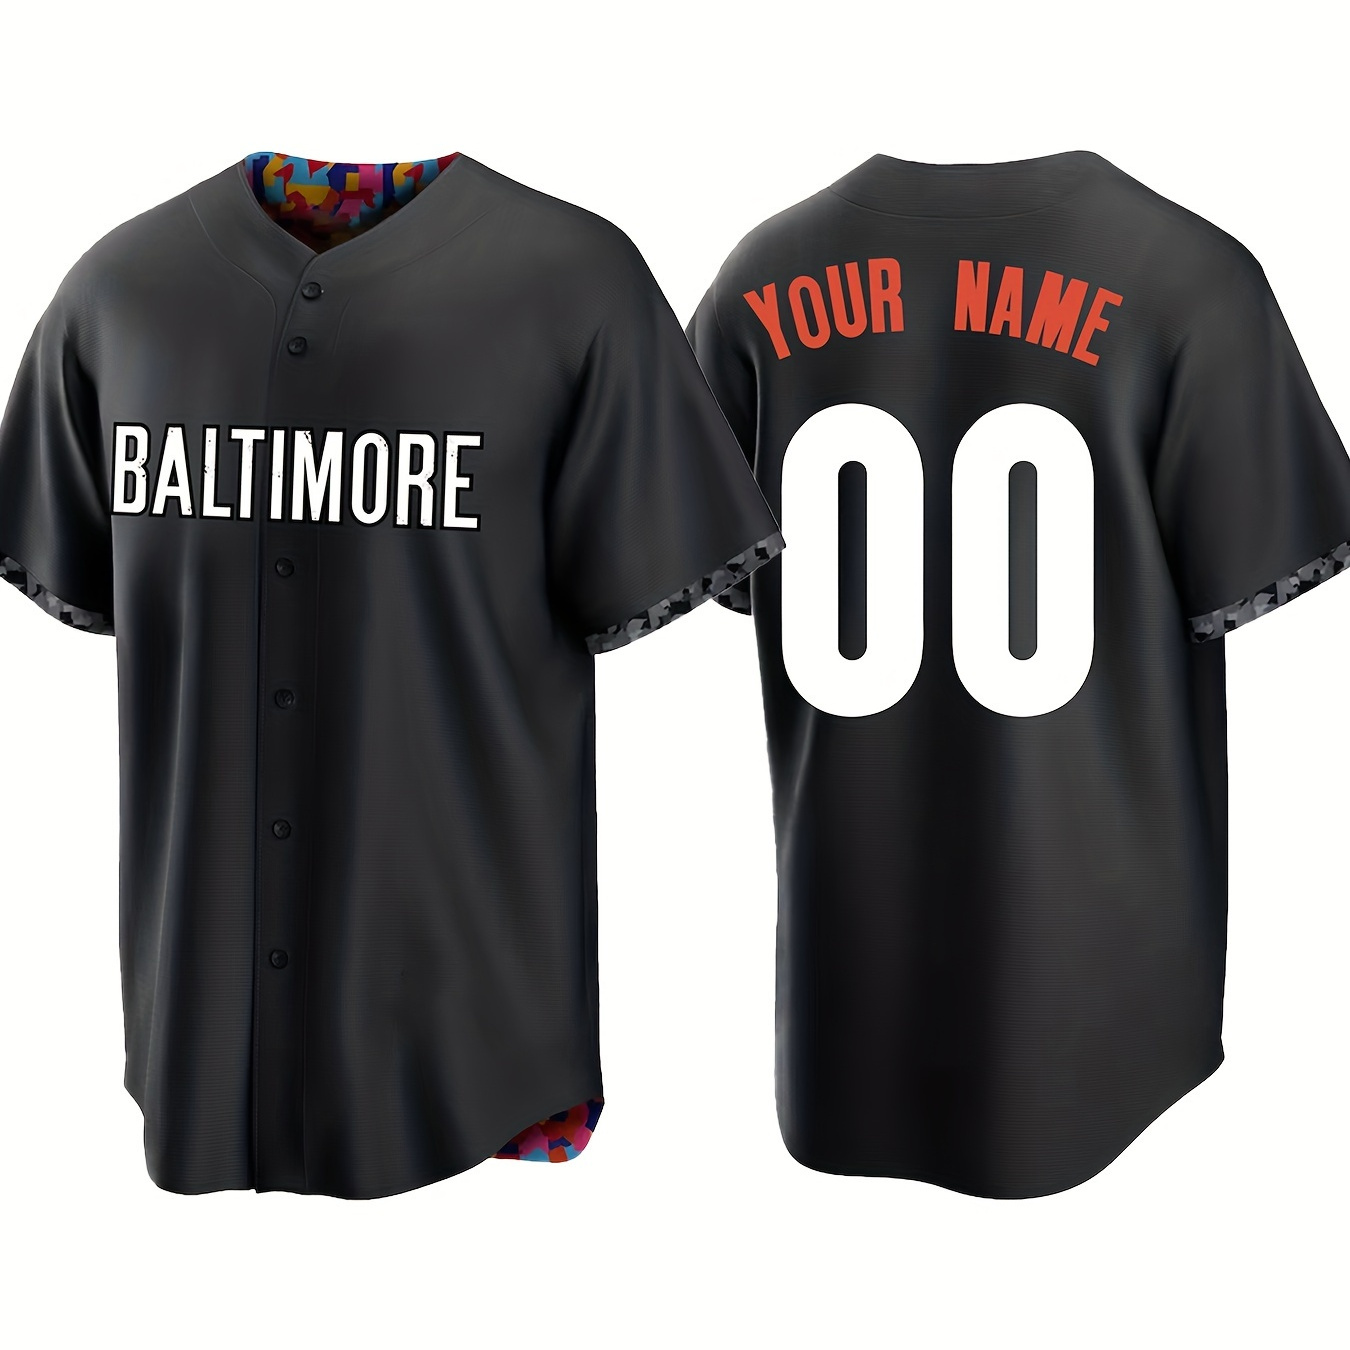 

Custom Men's Baseball Jersey, Leisure Sports Style, Personalized Name And Number, Athletic Team Uniform, As Gifts